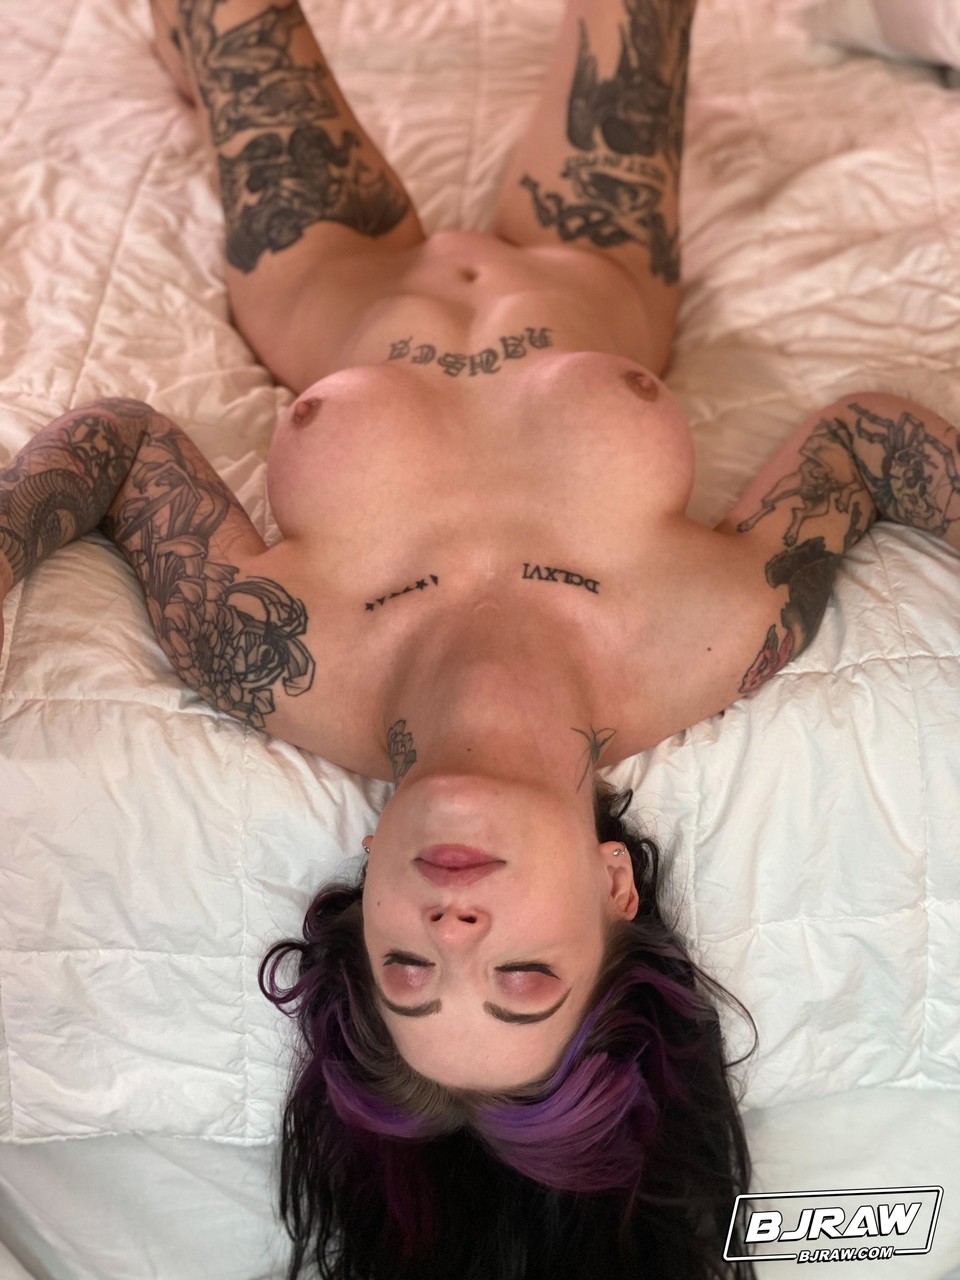 Brunette babe with tattoos Charlotte Sartre takes a dick in her mouth 色情照片 #424649935 | BJ Raw Pics, Charlotte Sartre, Tattoo, 手机色情